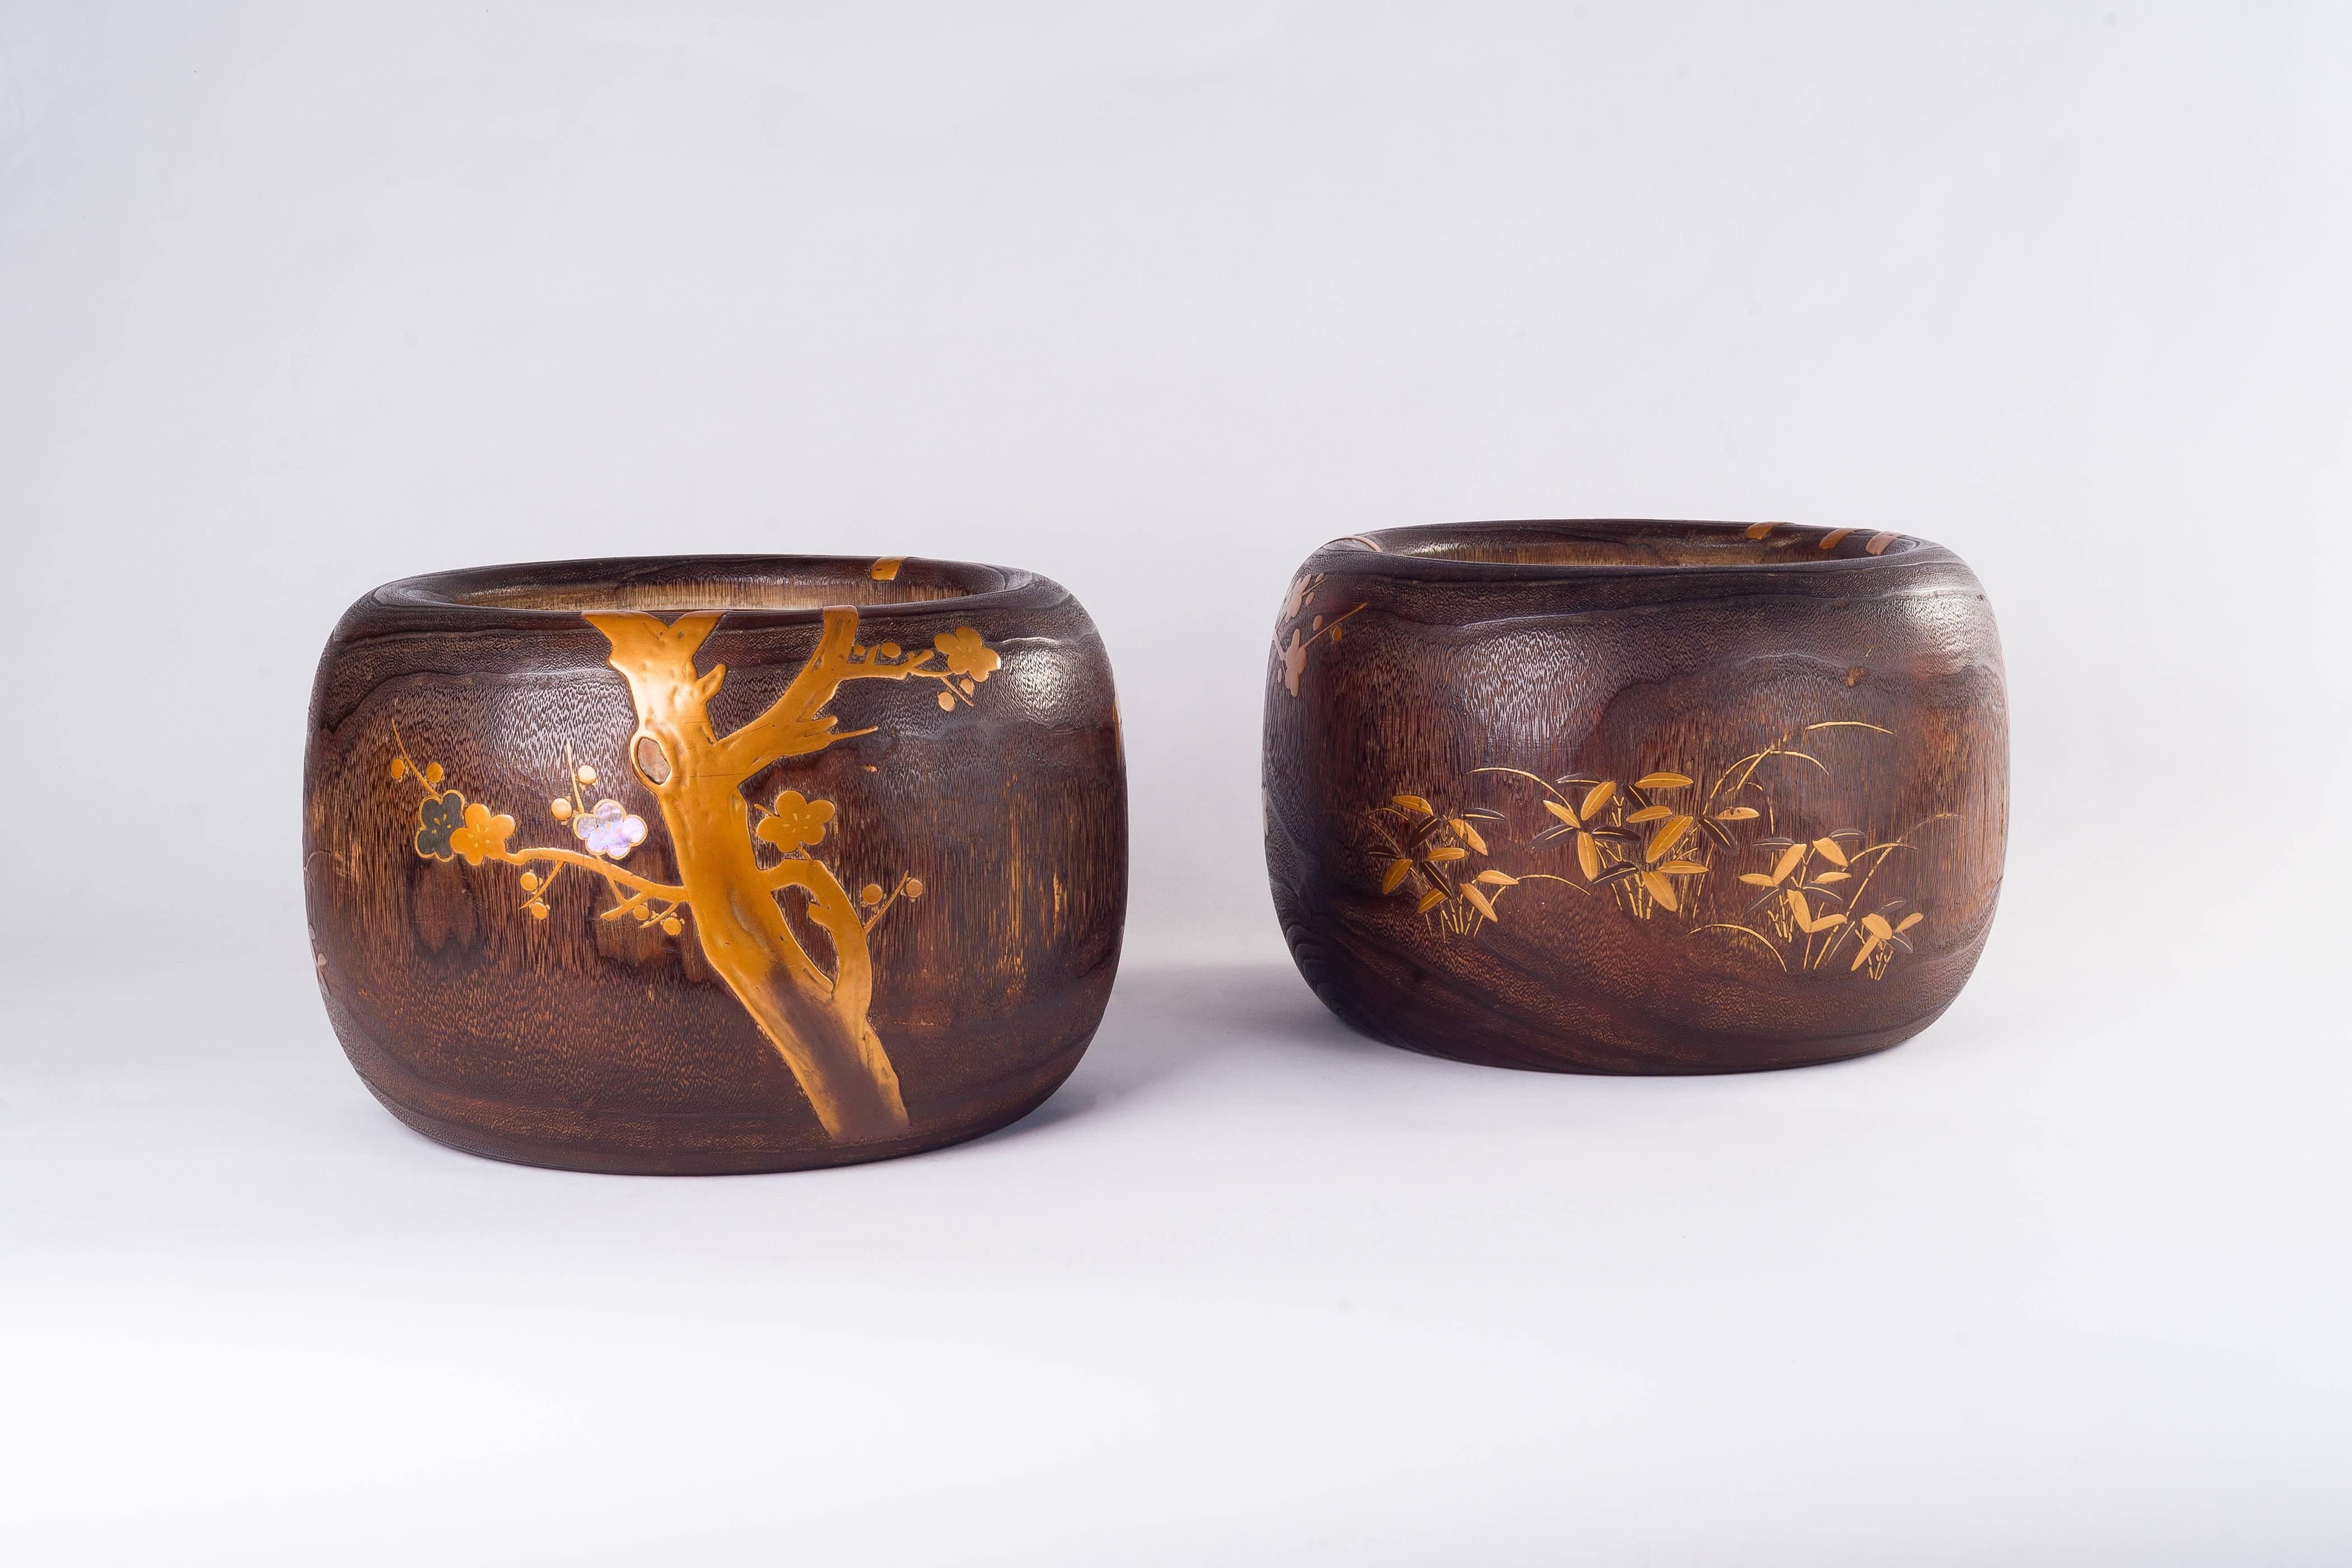 The hand-crafted pair of Japanese wooden hibachi (fire bowl) is finely decorated with plum blossom tree and foliage, and executed meticulously in hand-worked maki gold lacquer work with brass and mother-of-pearl inlay. The circular hibachi lined